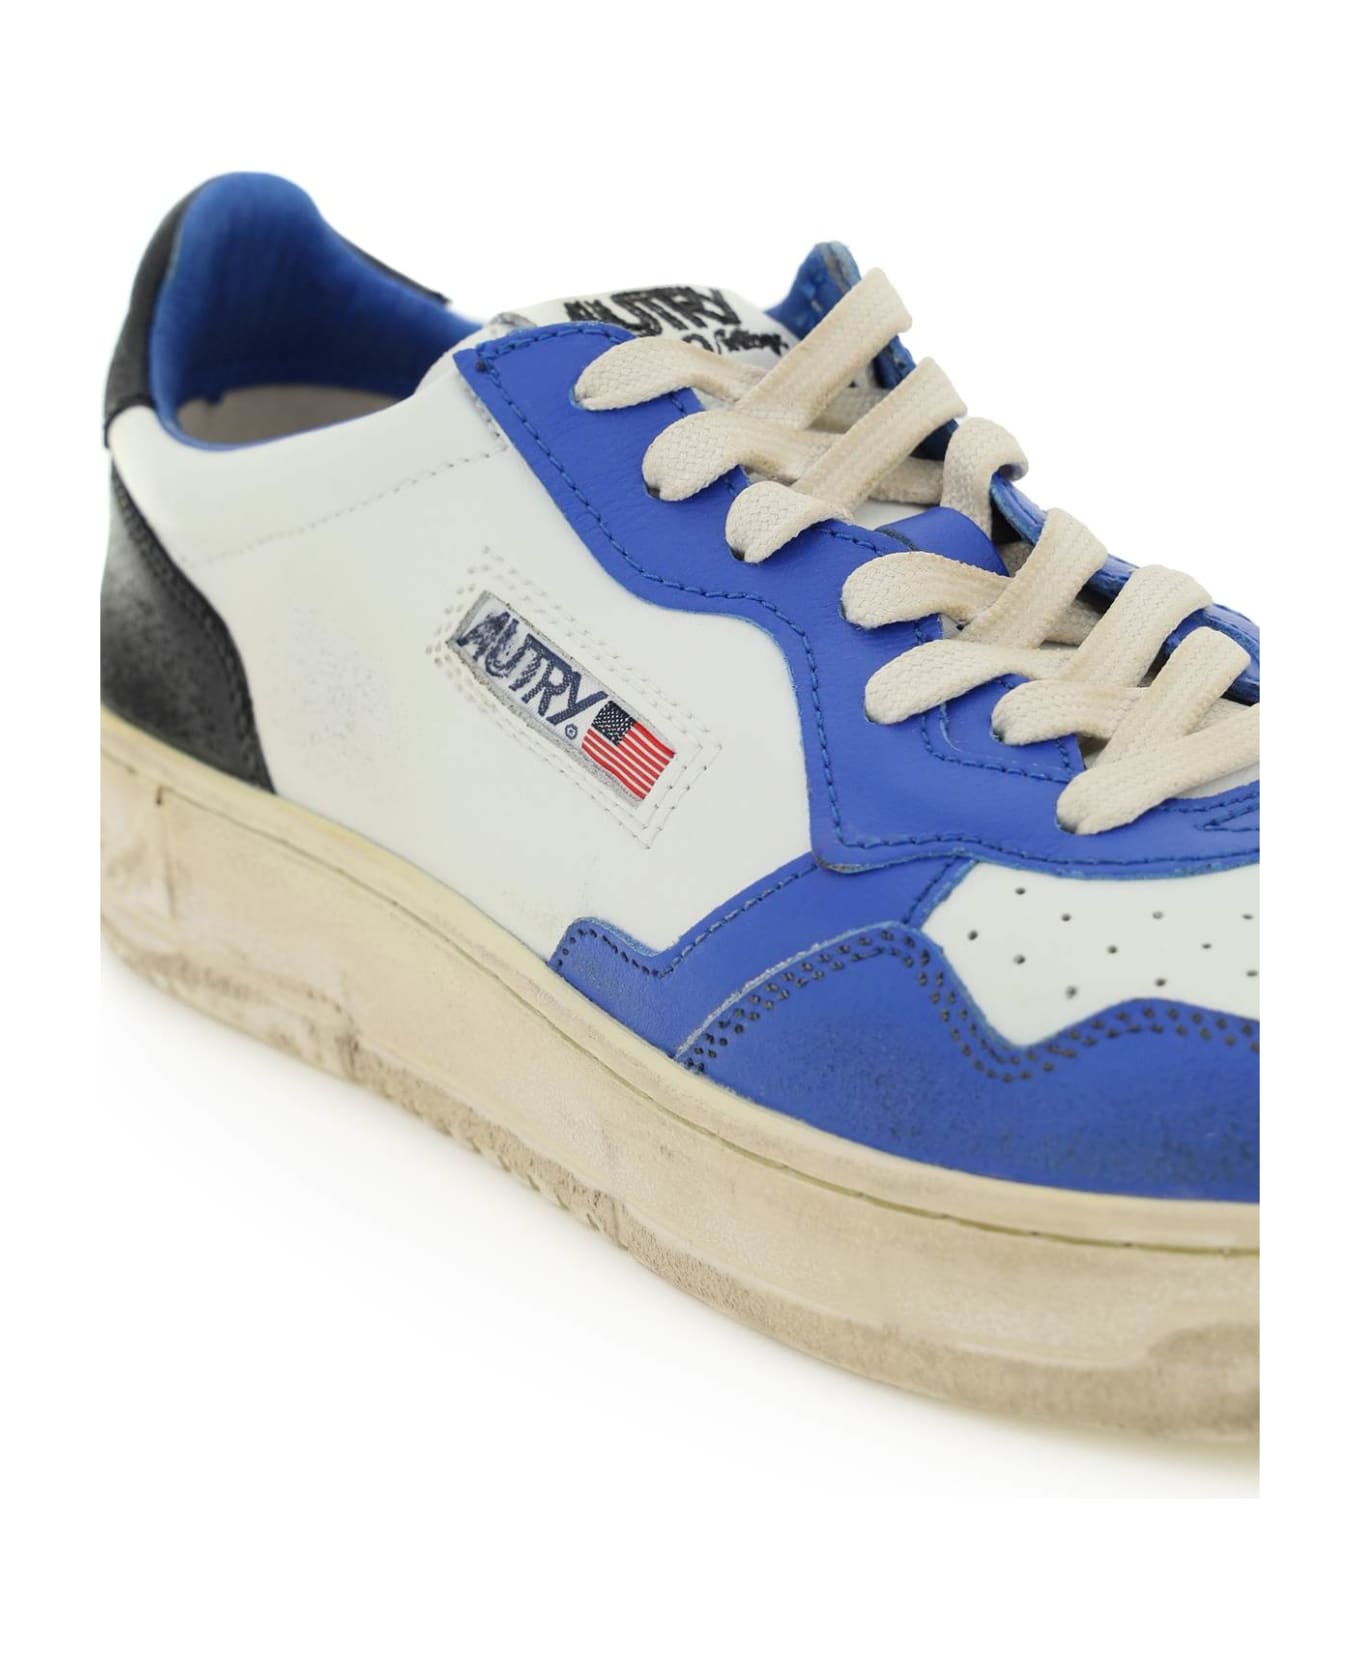 Autry Medalist Low Super Vintage Sneakers - White スニーカー